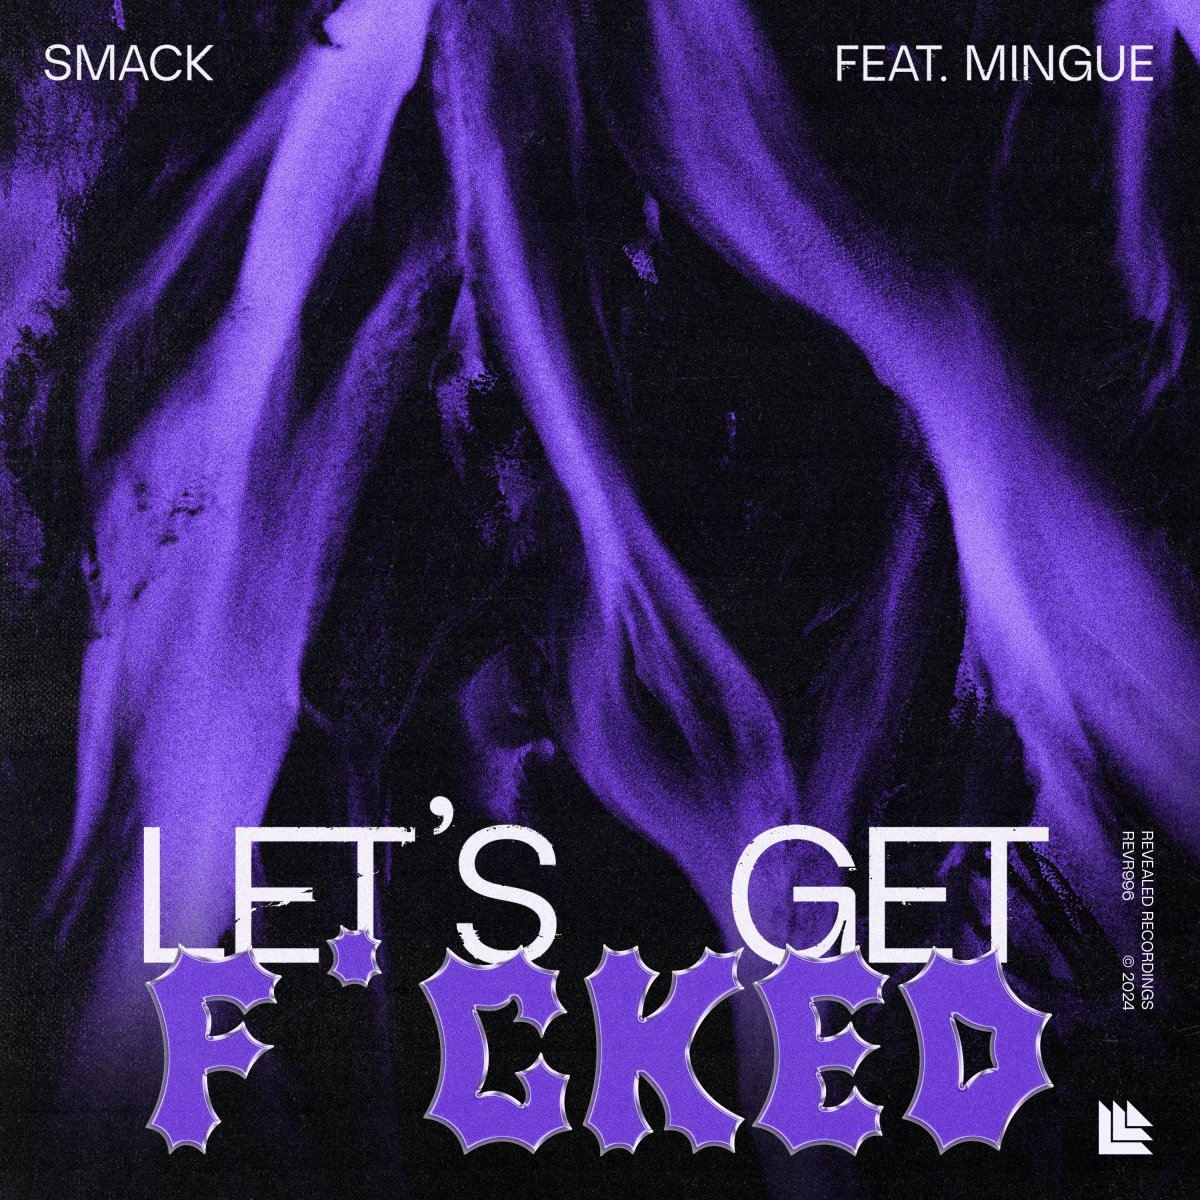 Let's Get Fucked - SMACK⁠ feat. Mingue⁠ 